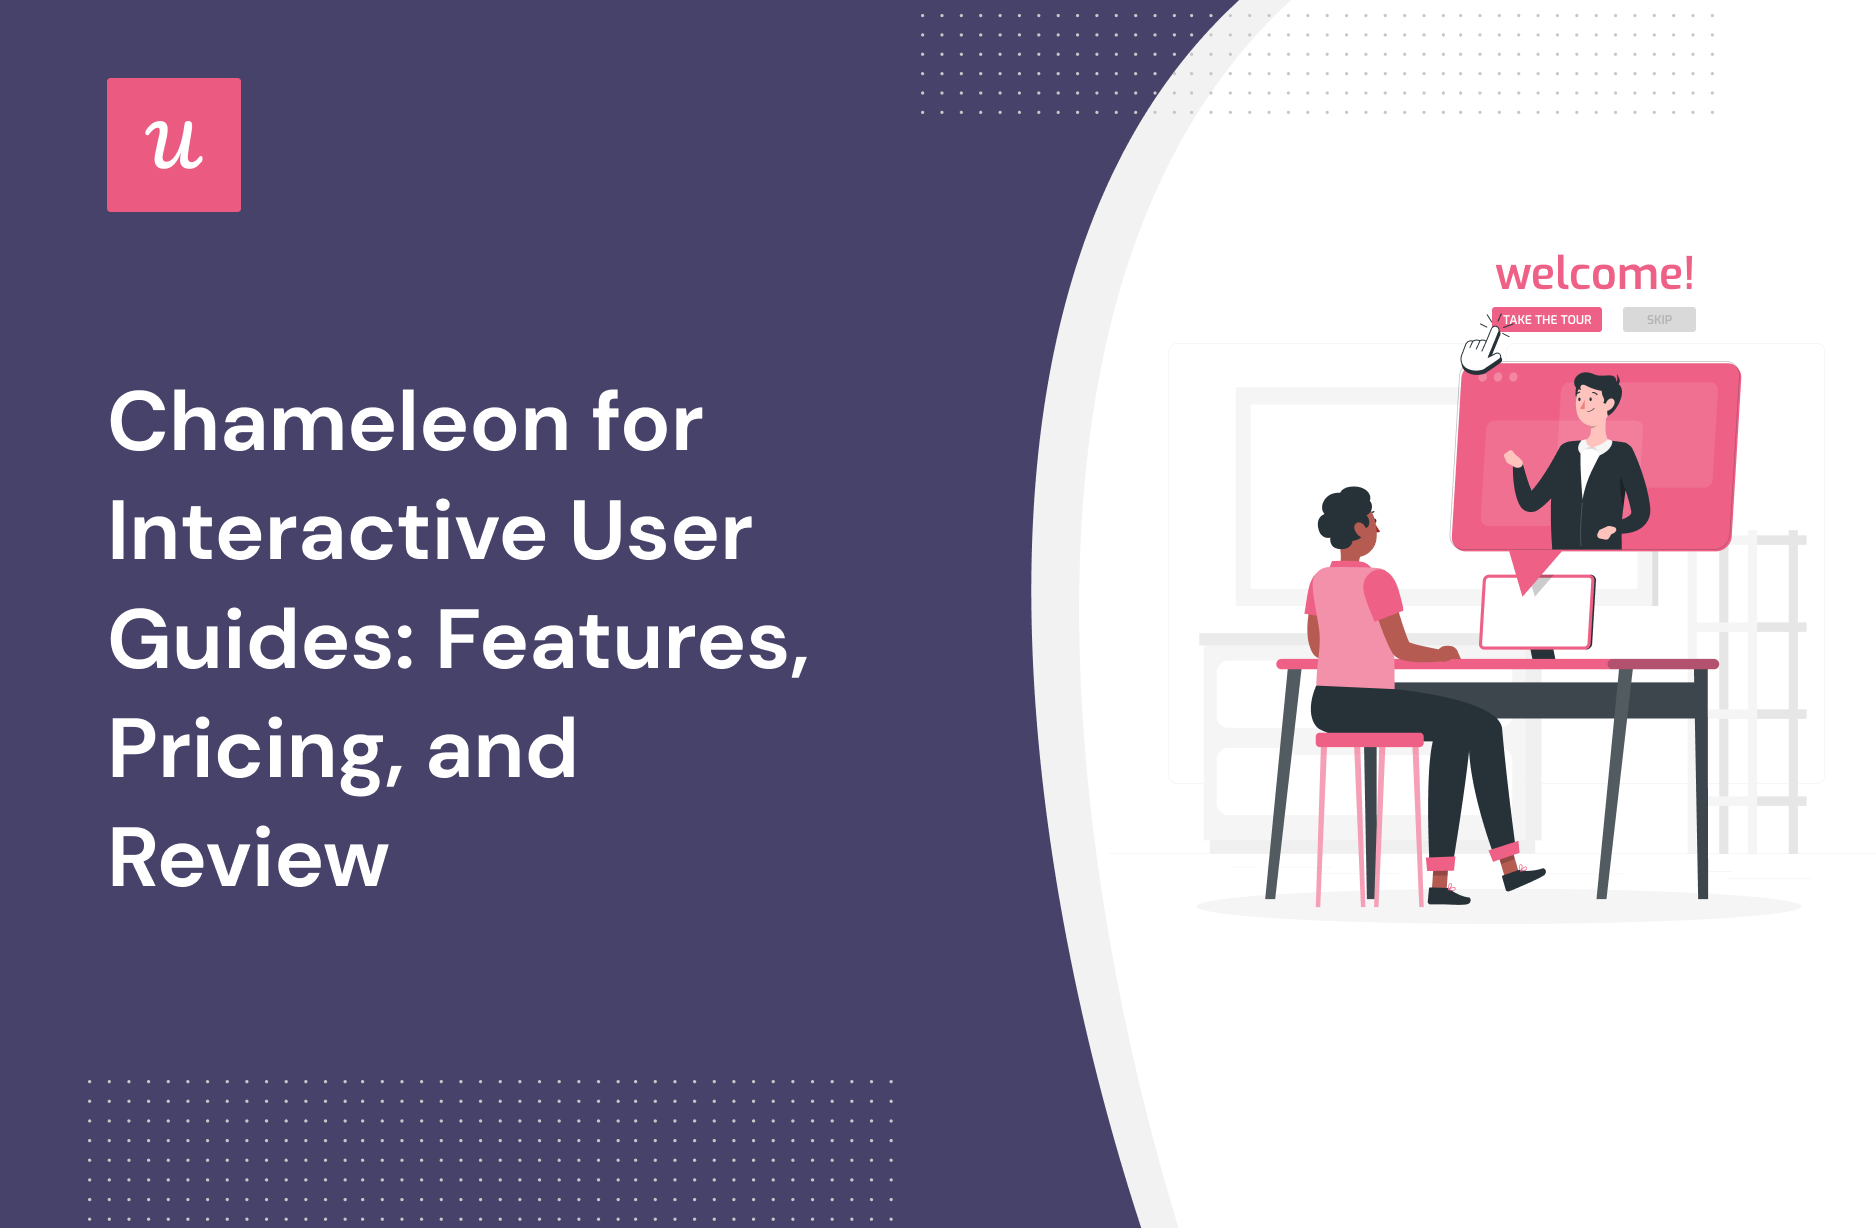 Chameleon for Interactive User Guides: Features, Pricing, and Review